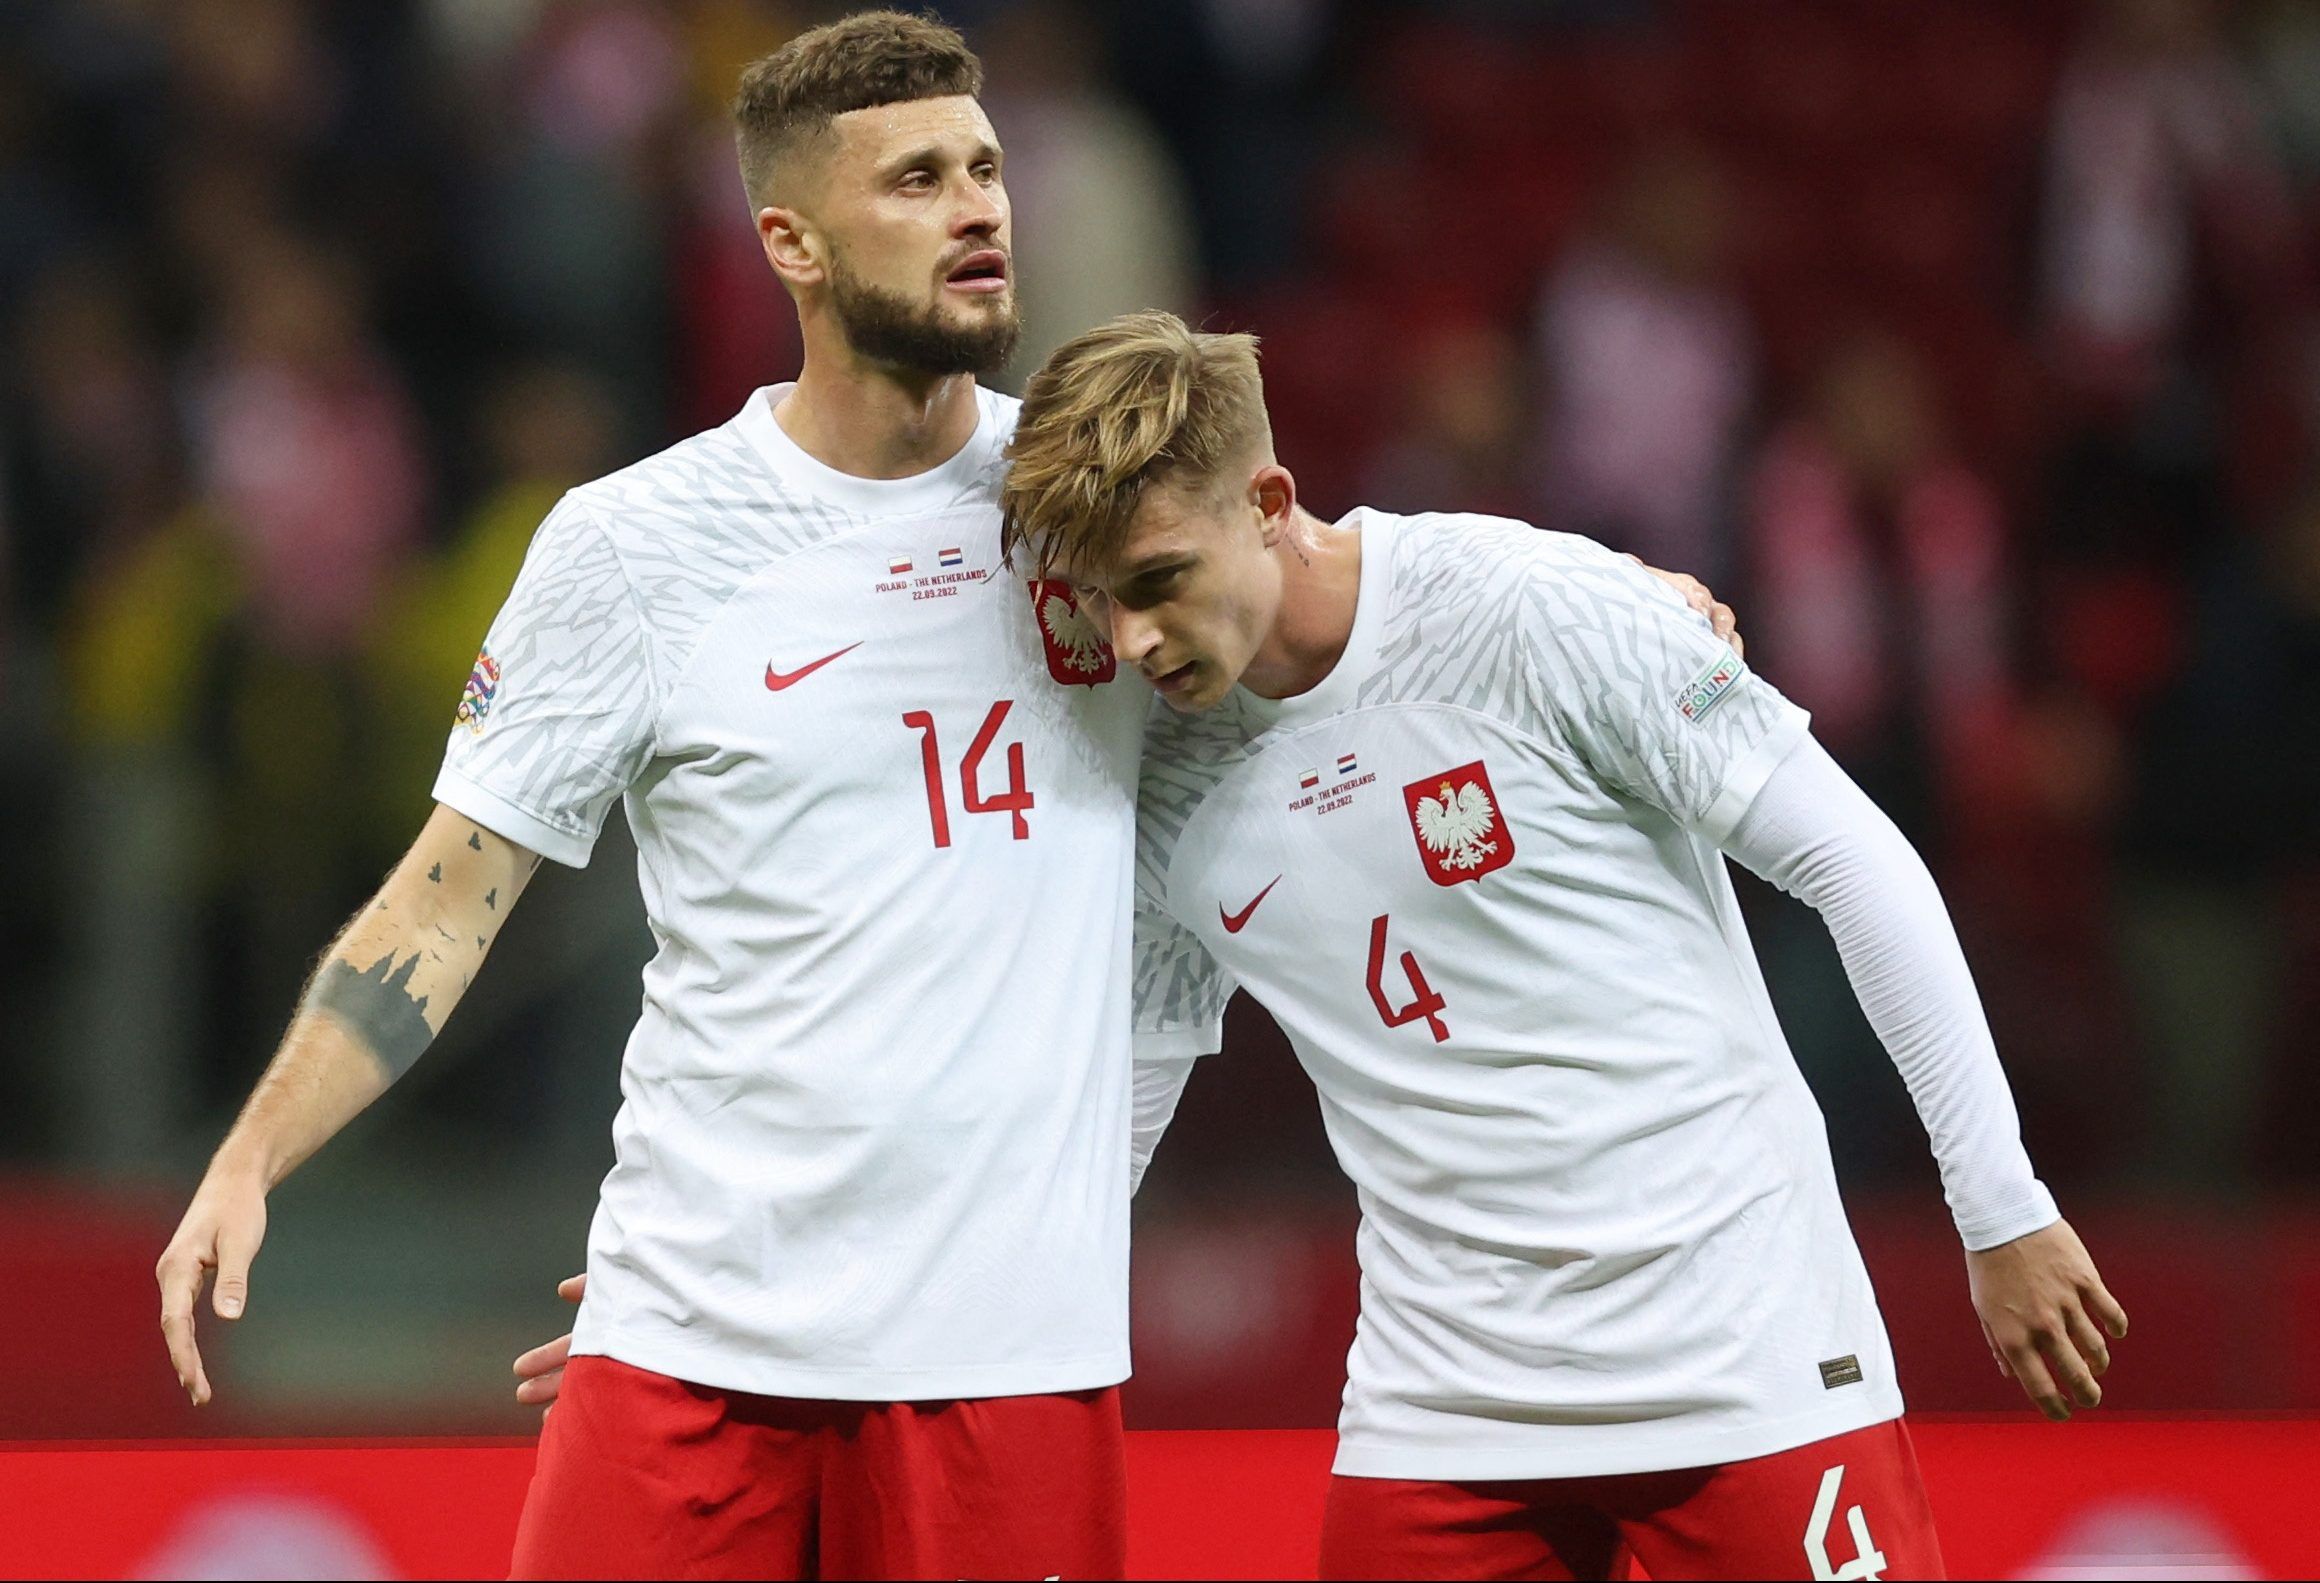 Soccer Football - UEFA Nations League - Group D - Poland v Netherlands - PGE Narodowy, Warsaw, Poland - September 22, 2022 Poland's Mateusz Klich and Michal Skoras look dejected after the match REUTERS/Kacper Pempel